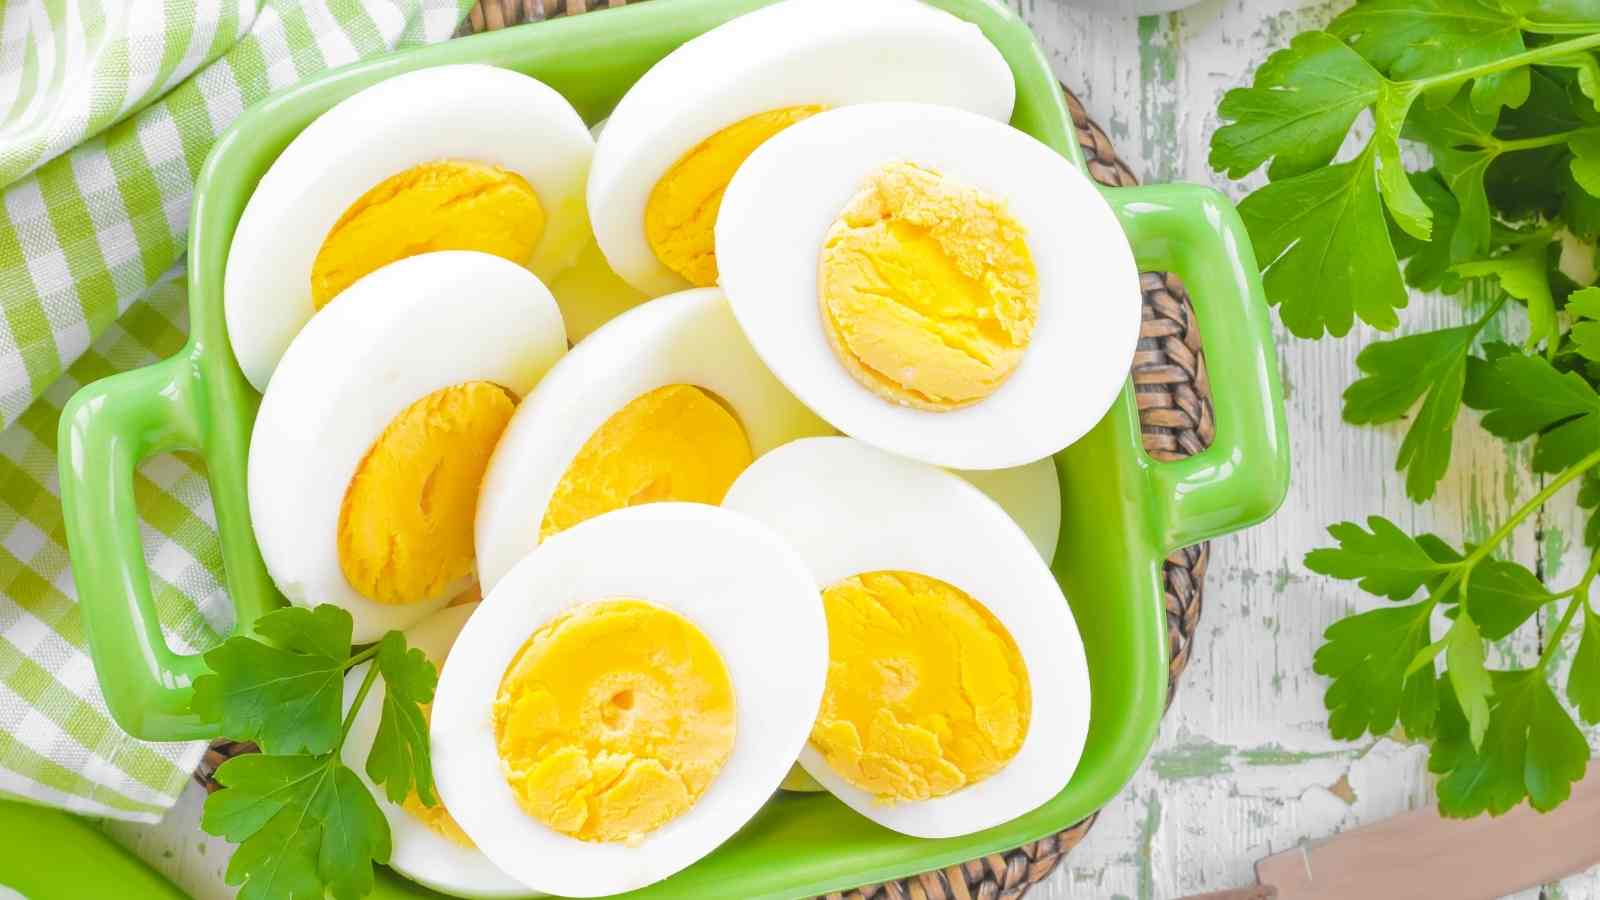 How to Microwave Hard Boiled Eggs